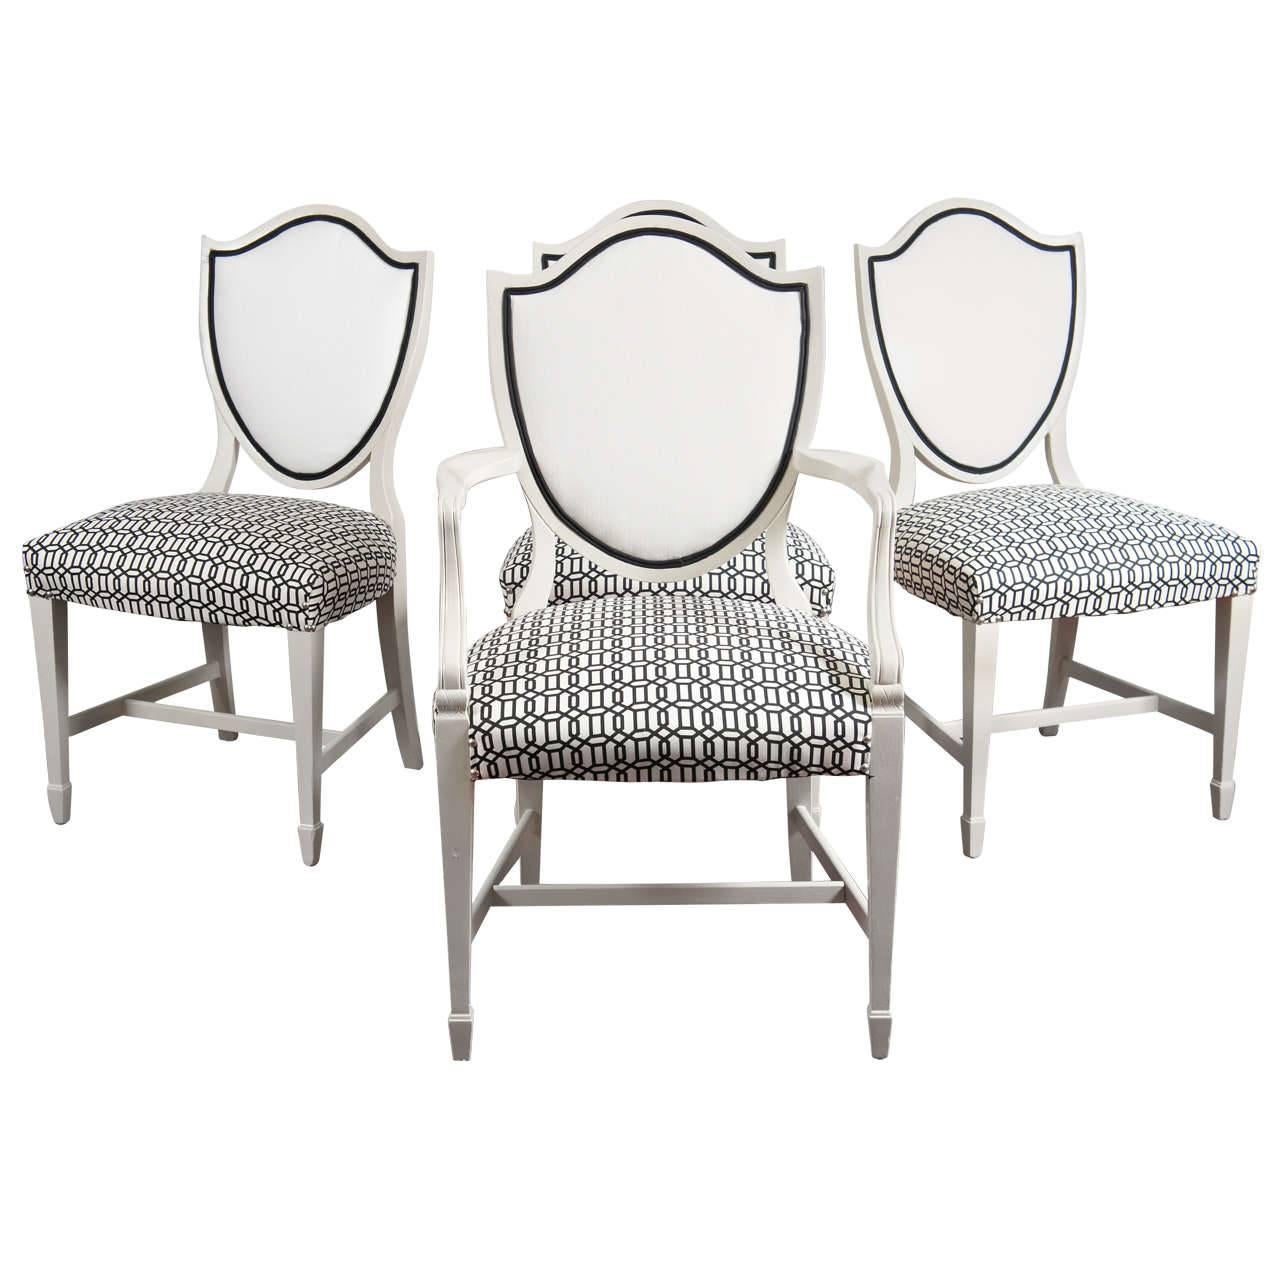 Four Adam Shield-Back Style Chairs